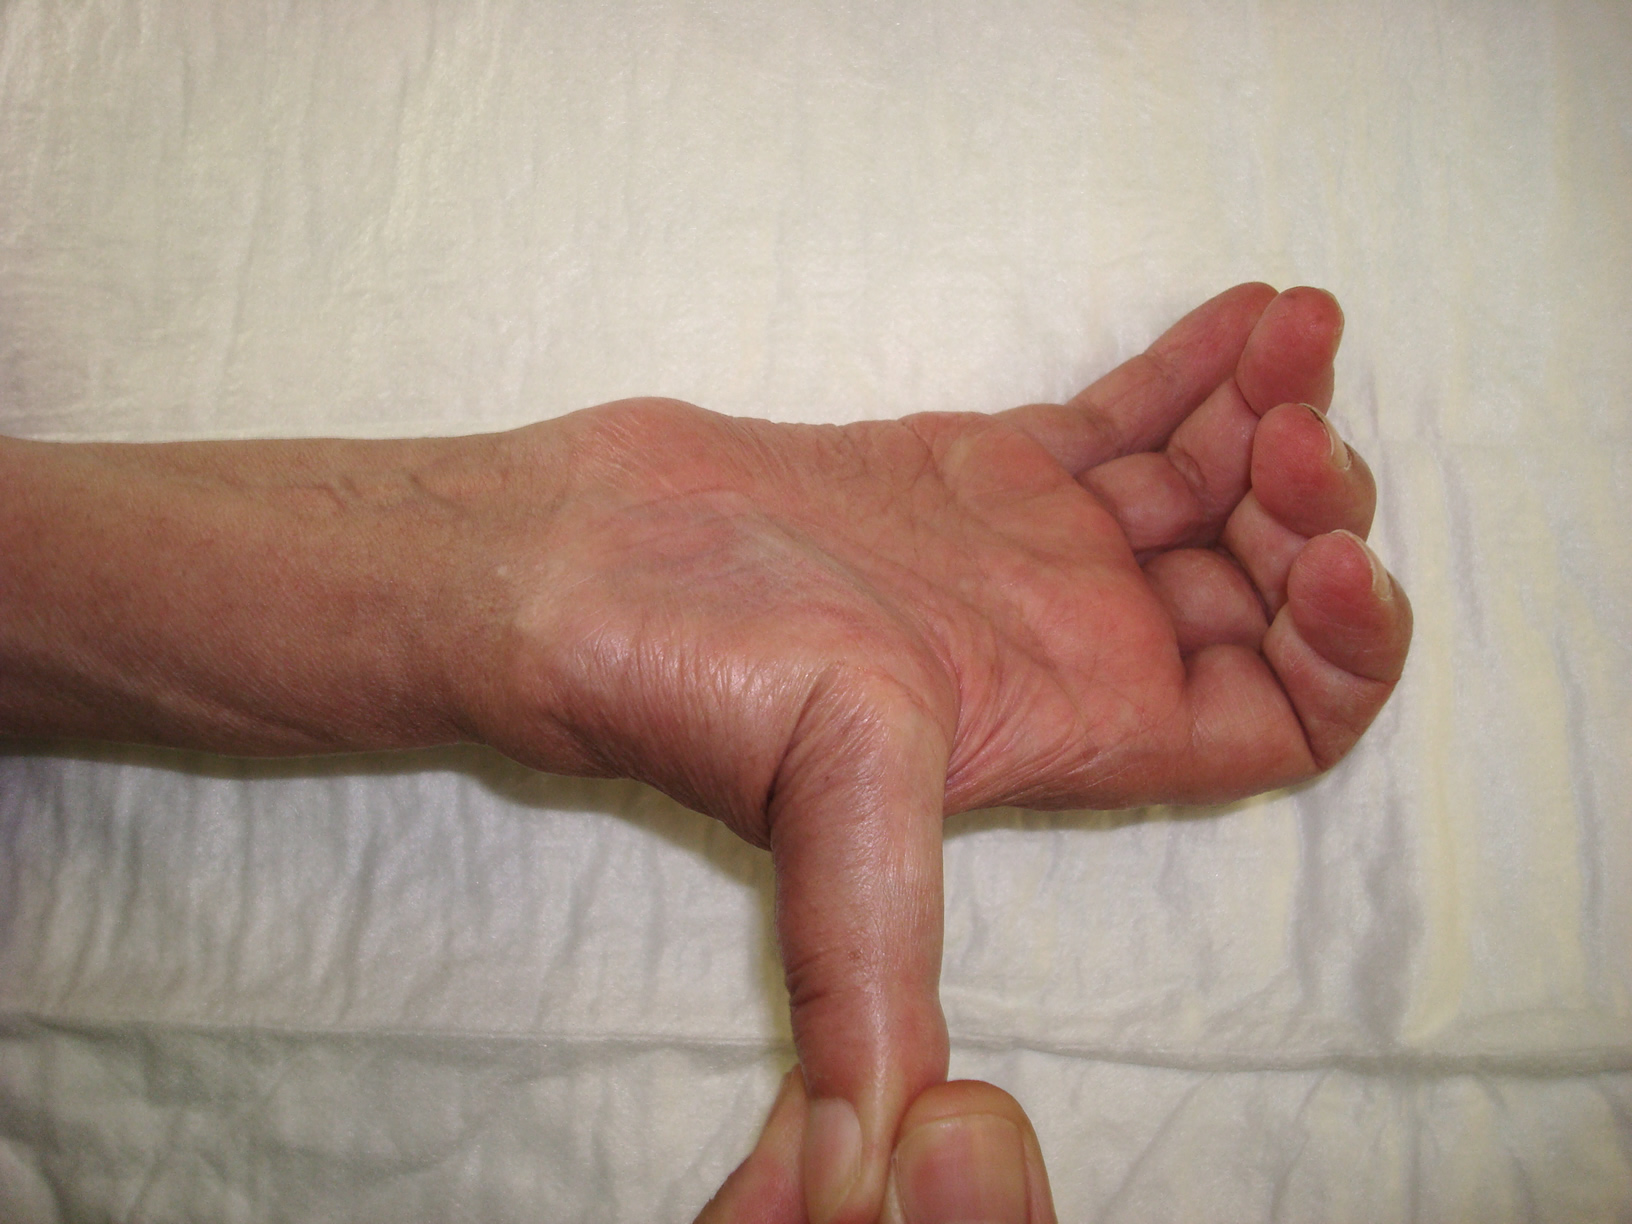 The ligamentous hyperlaxity can cause pain in the musician’s hand